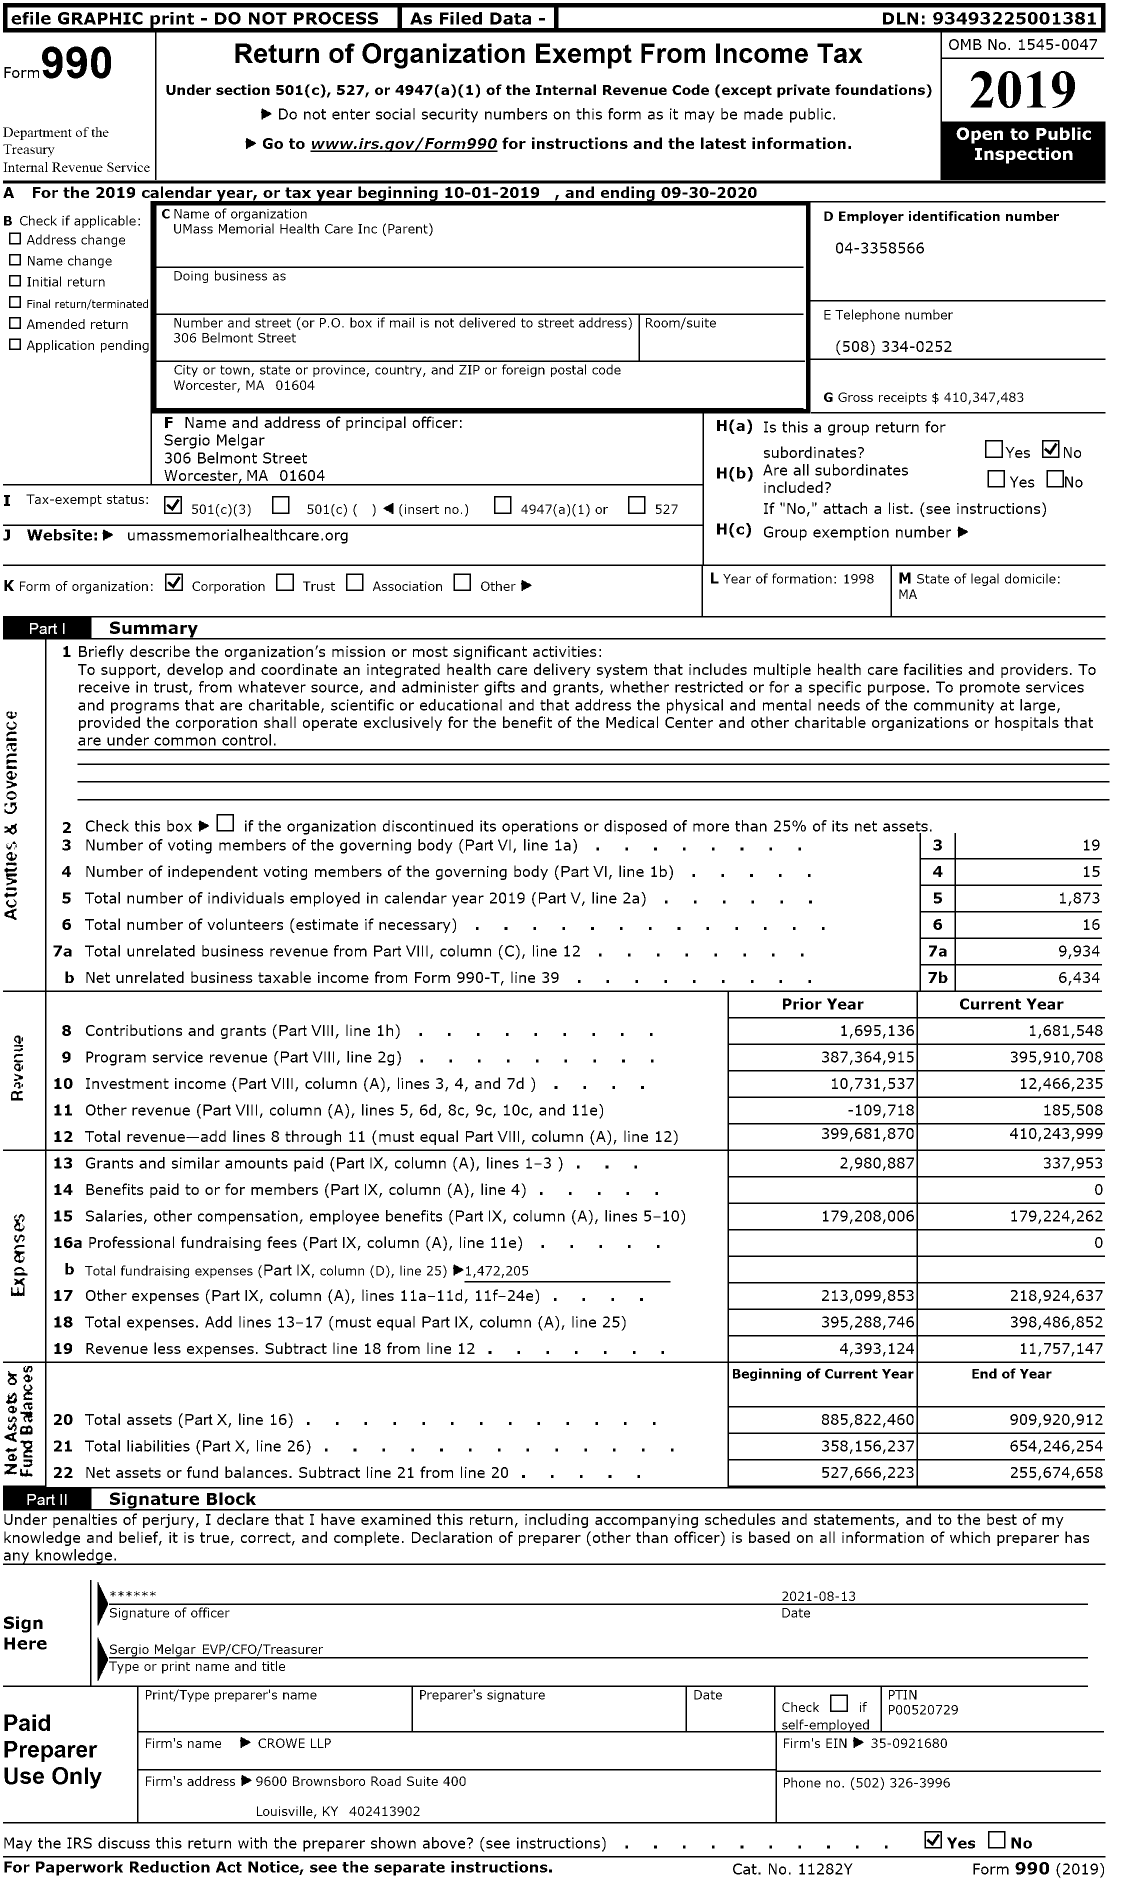 Image of first page of 2019 Form 990 for UMass Memorial Health Care (UMMHC)